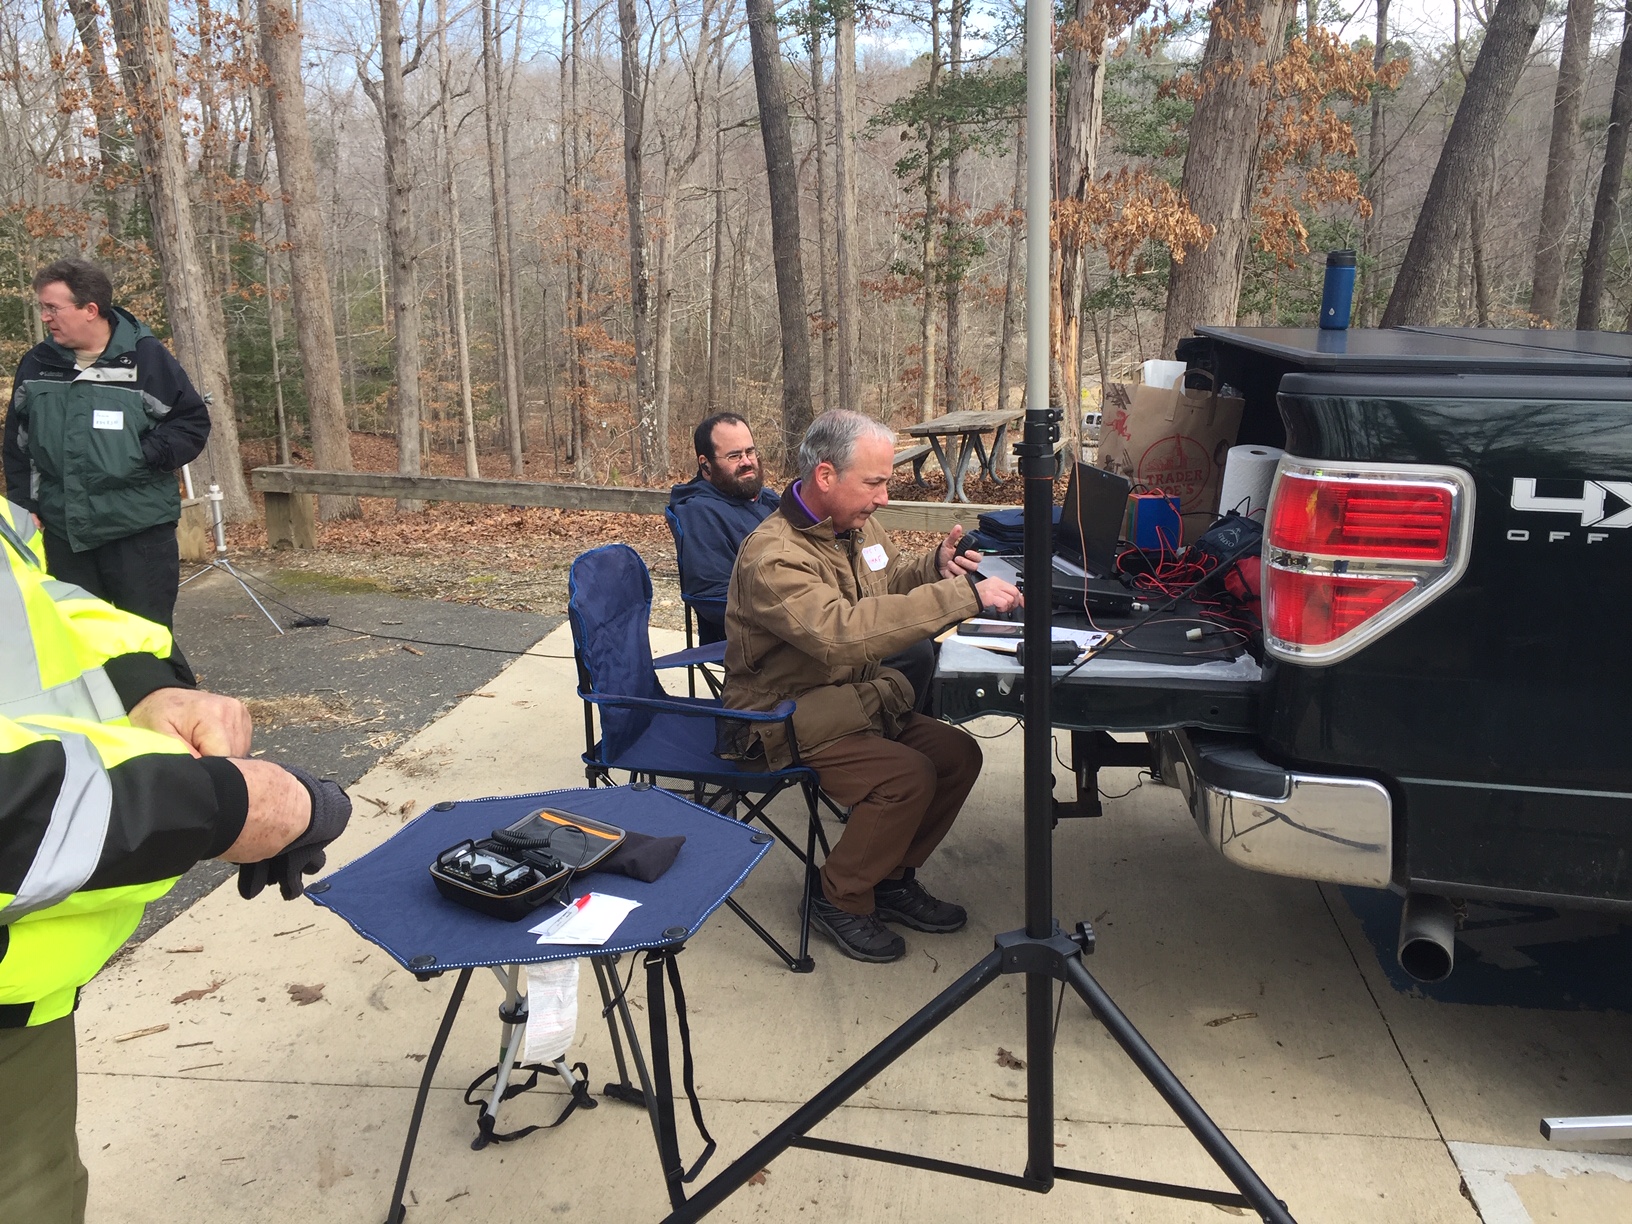 Club member Mike Friedman W4MAF operates a radio at the club's POTA activation in February 2022 at Pocahontas State Park